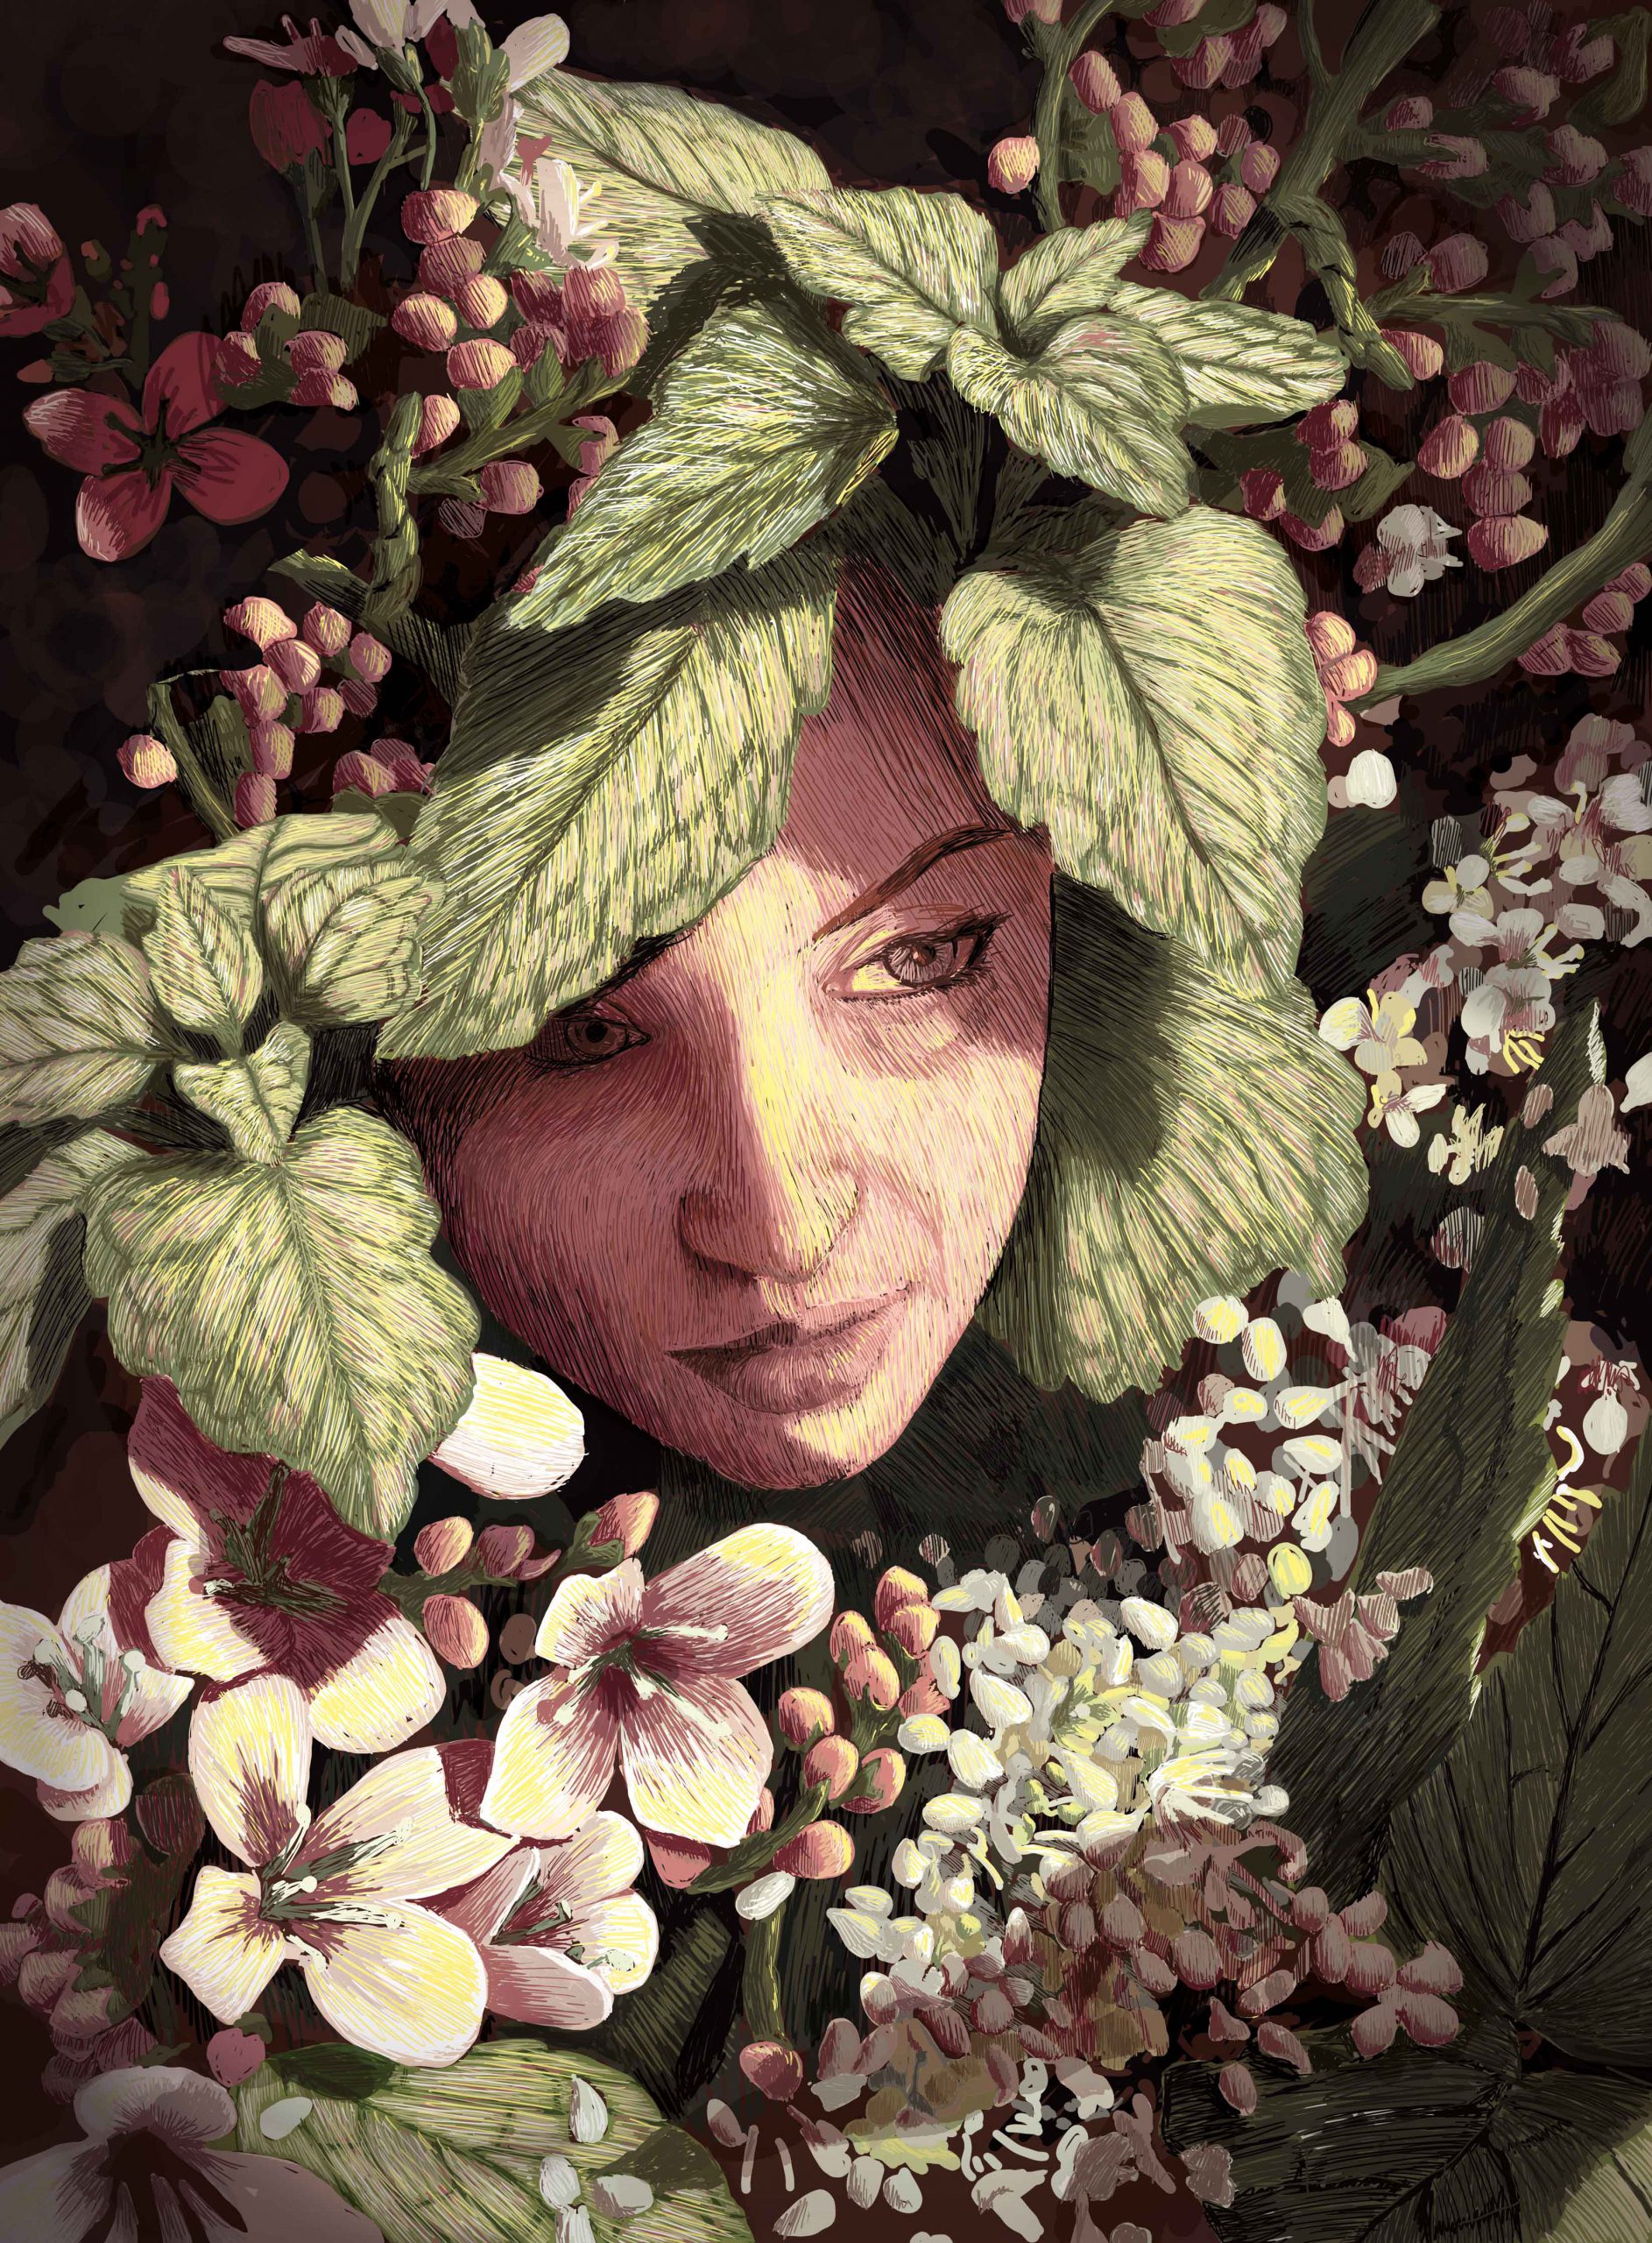 Portrait of a young woman enjoying and completing the beauty of spring. Flower Girl – limited Fine Art Print, Flower Girl – Digital Illustration